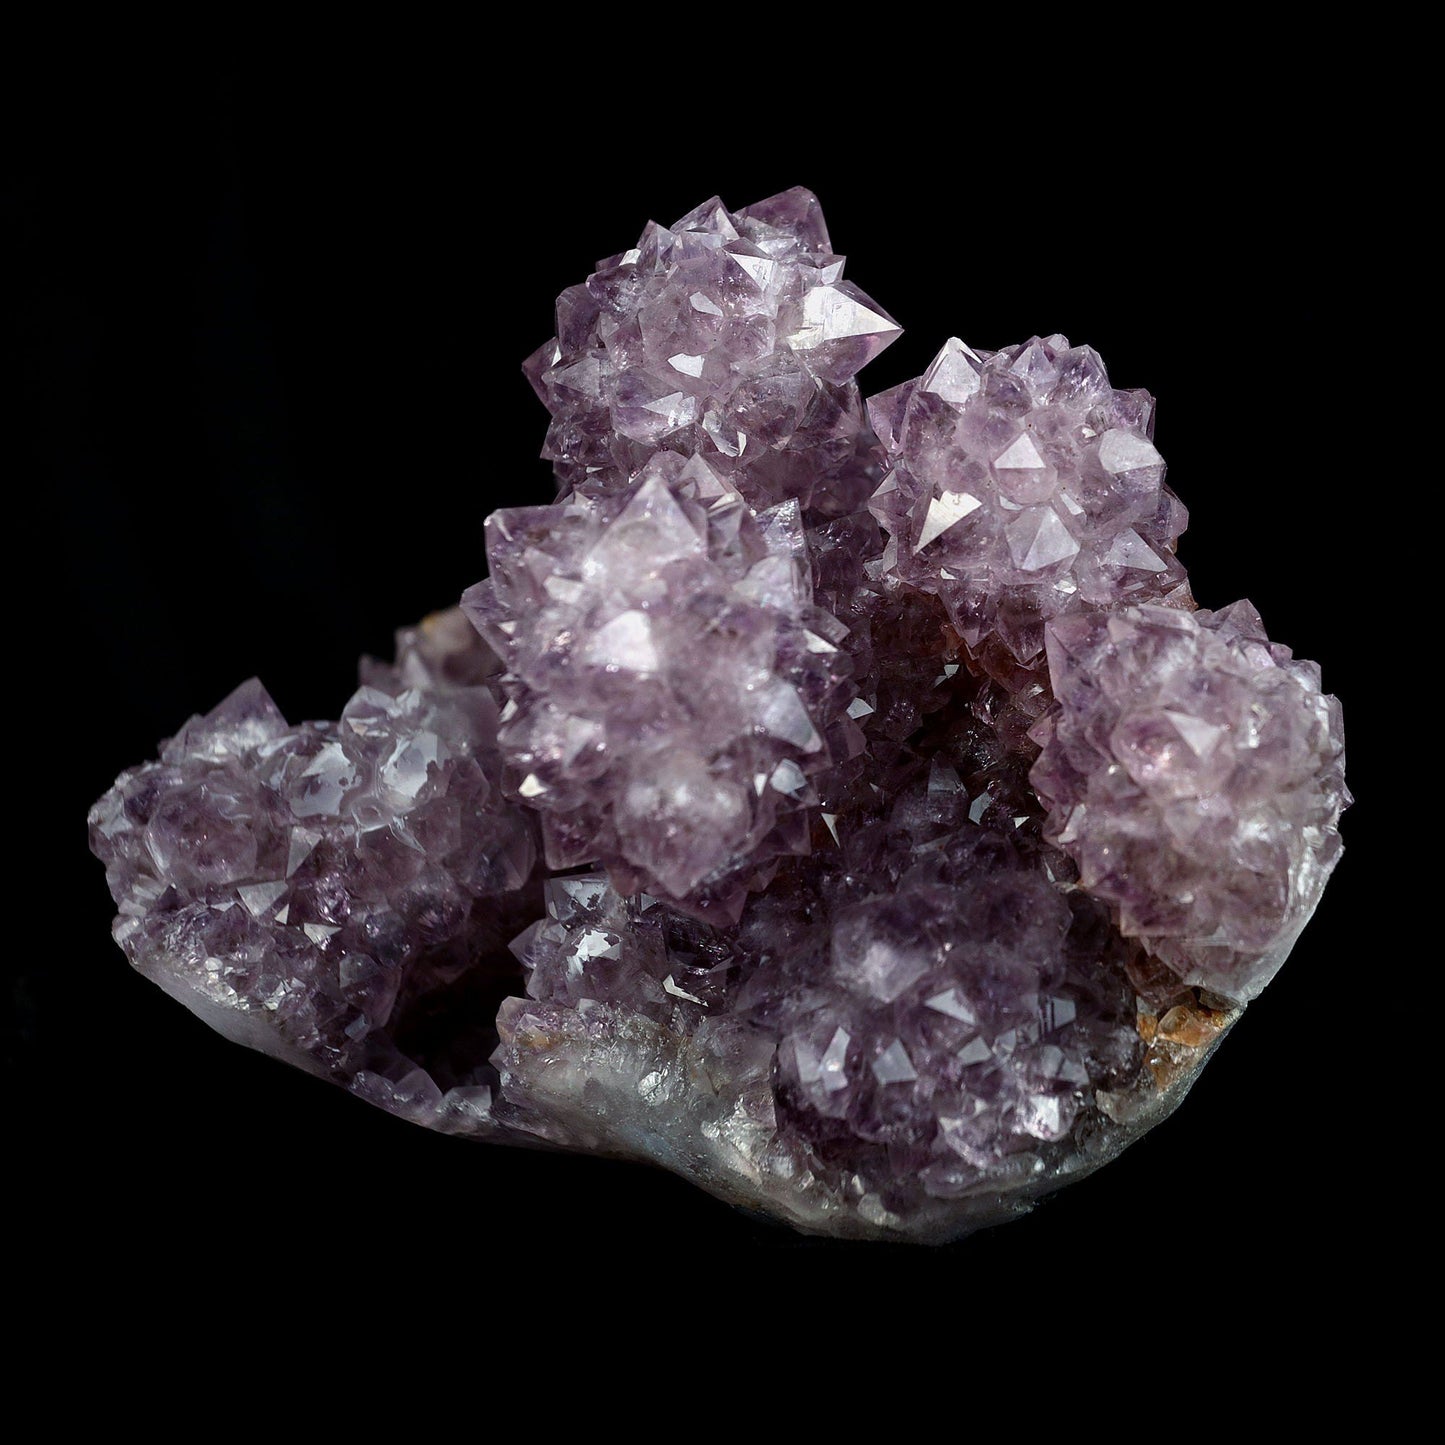 Amethyst Purple Color Crystal Natural Mineral Specimen # B 4092  https://www.superbminerals.us/products/amethyst-purple-color-crystal-natural-mineral-specimen-b-4092  Features:A very large Geode fragment lined with black bubbled&nbsp; Chalcedony, partially coated with a sparkling colorless Chalcedony druse. There is another, smaller bubuled crystal near a corner, but it’s the pristine, centered that steals the show! The luster, contrast, crystal formation and balance is outstanding